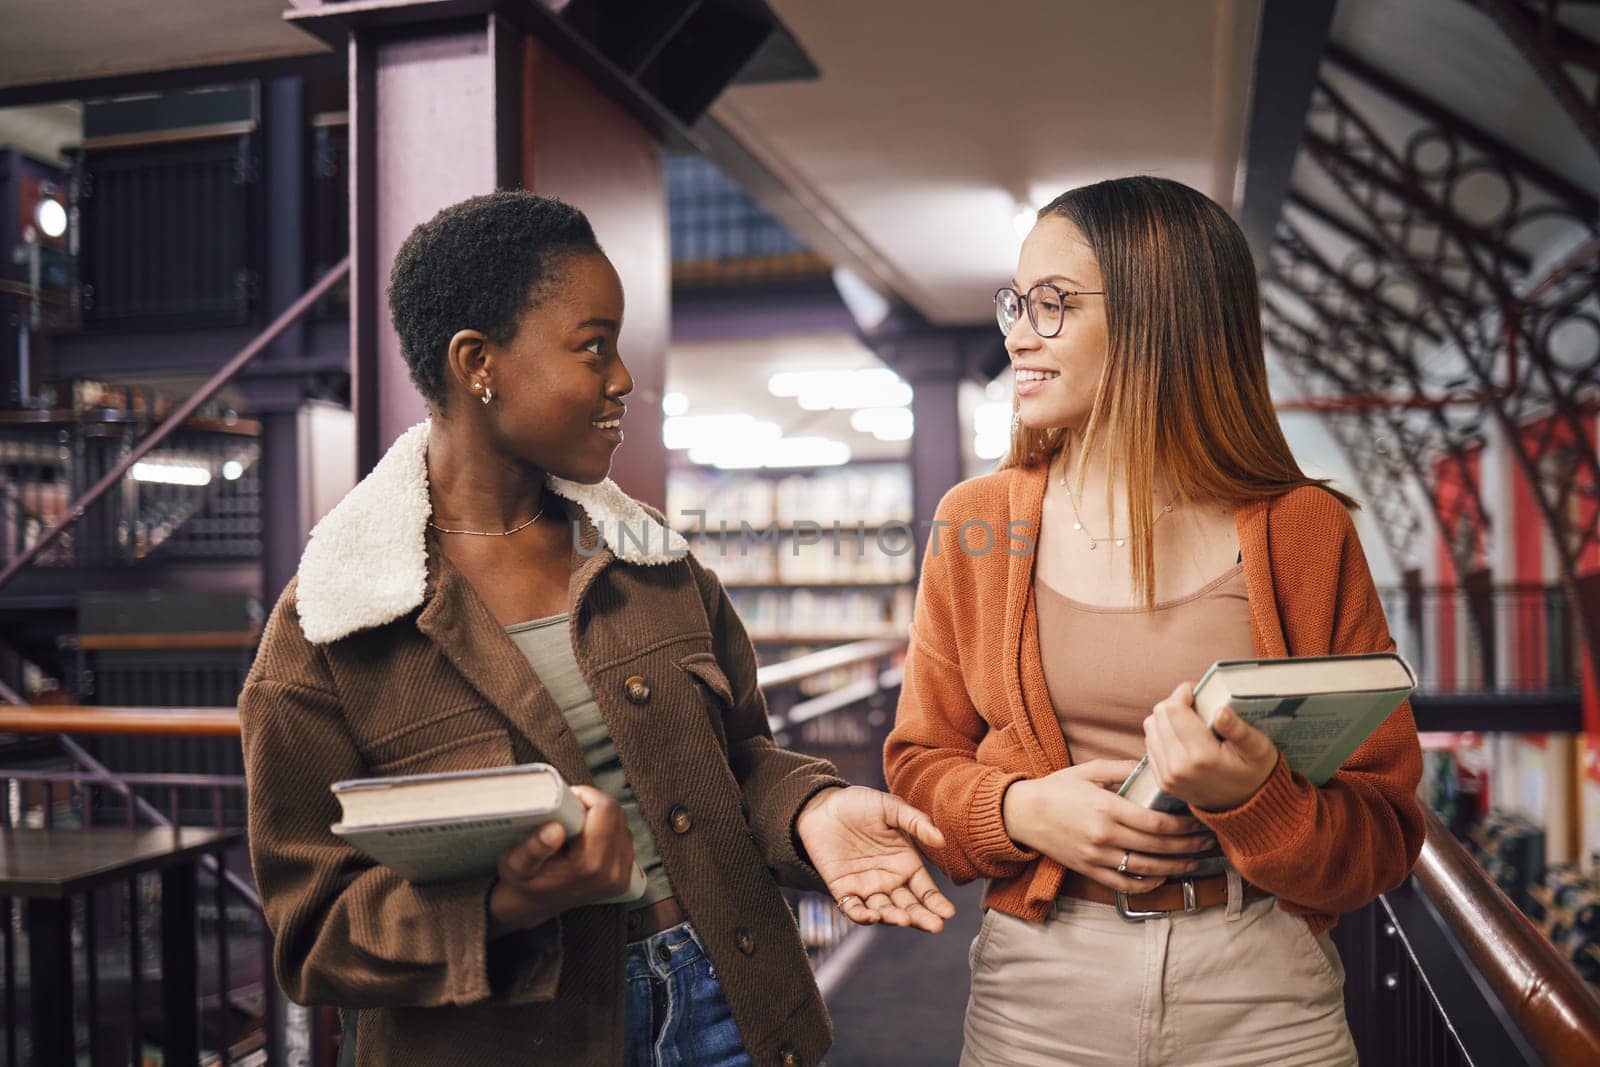 University students, library and talking about books, education and learning together at campus. Women friends have conversation about knowledge, studying and walking to research studying scholarship by YuriArcurs